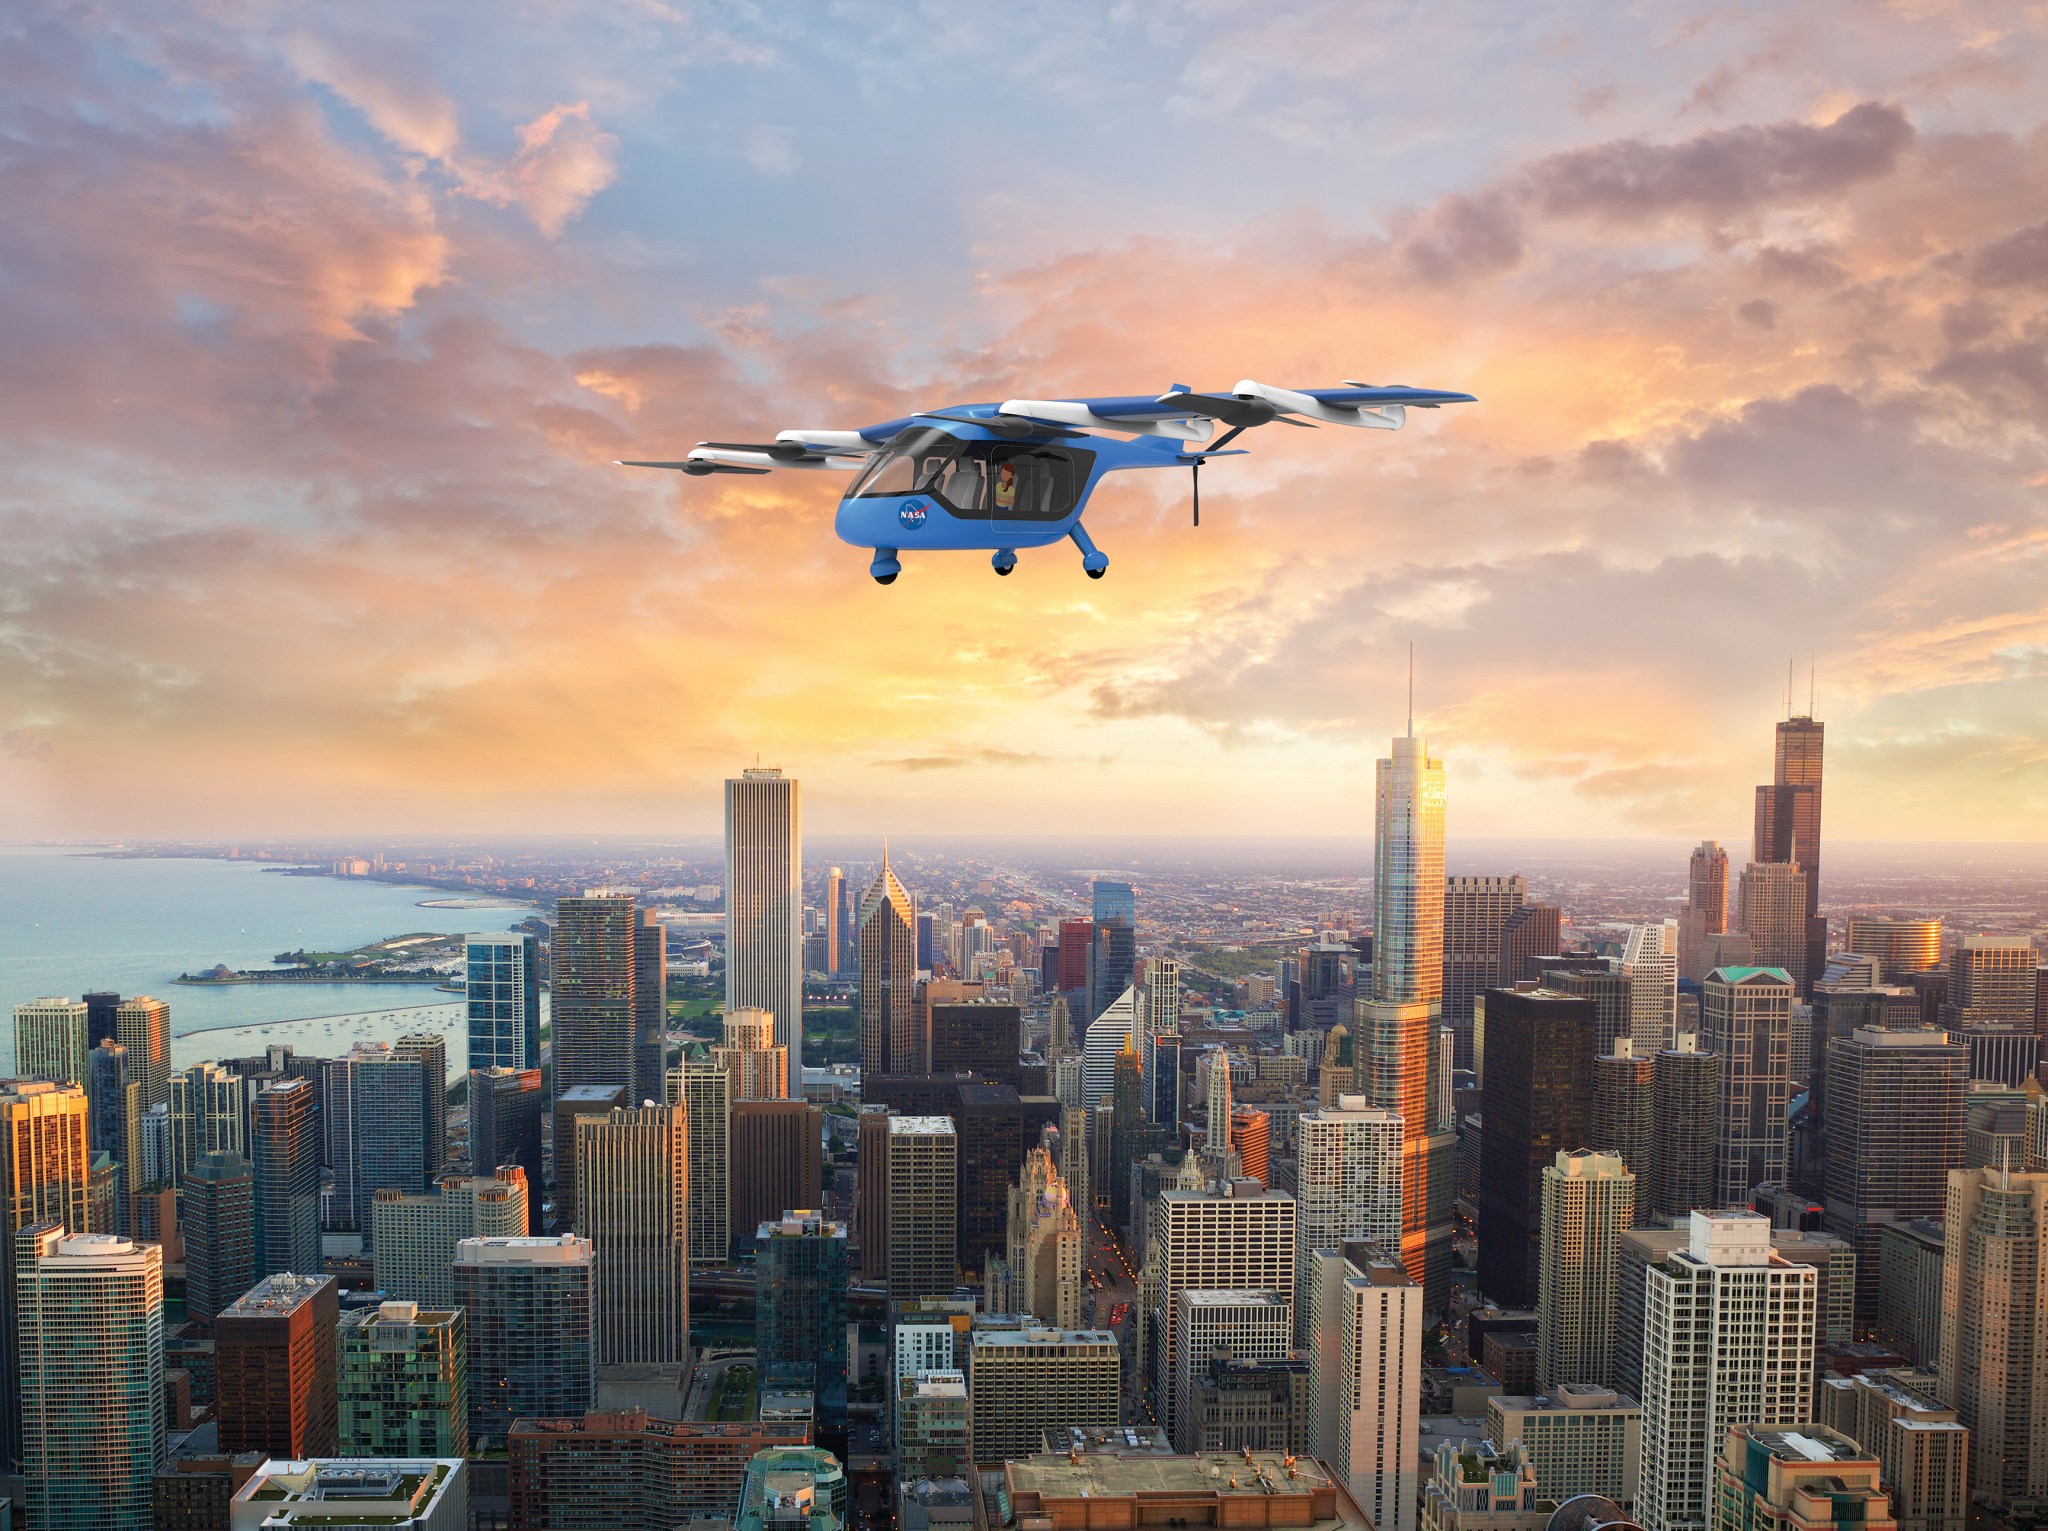 Artist illustration of an unmanned passenger aircraft in flight during sunrise in the city.